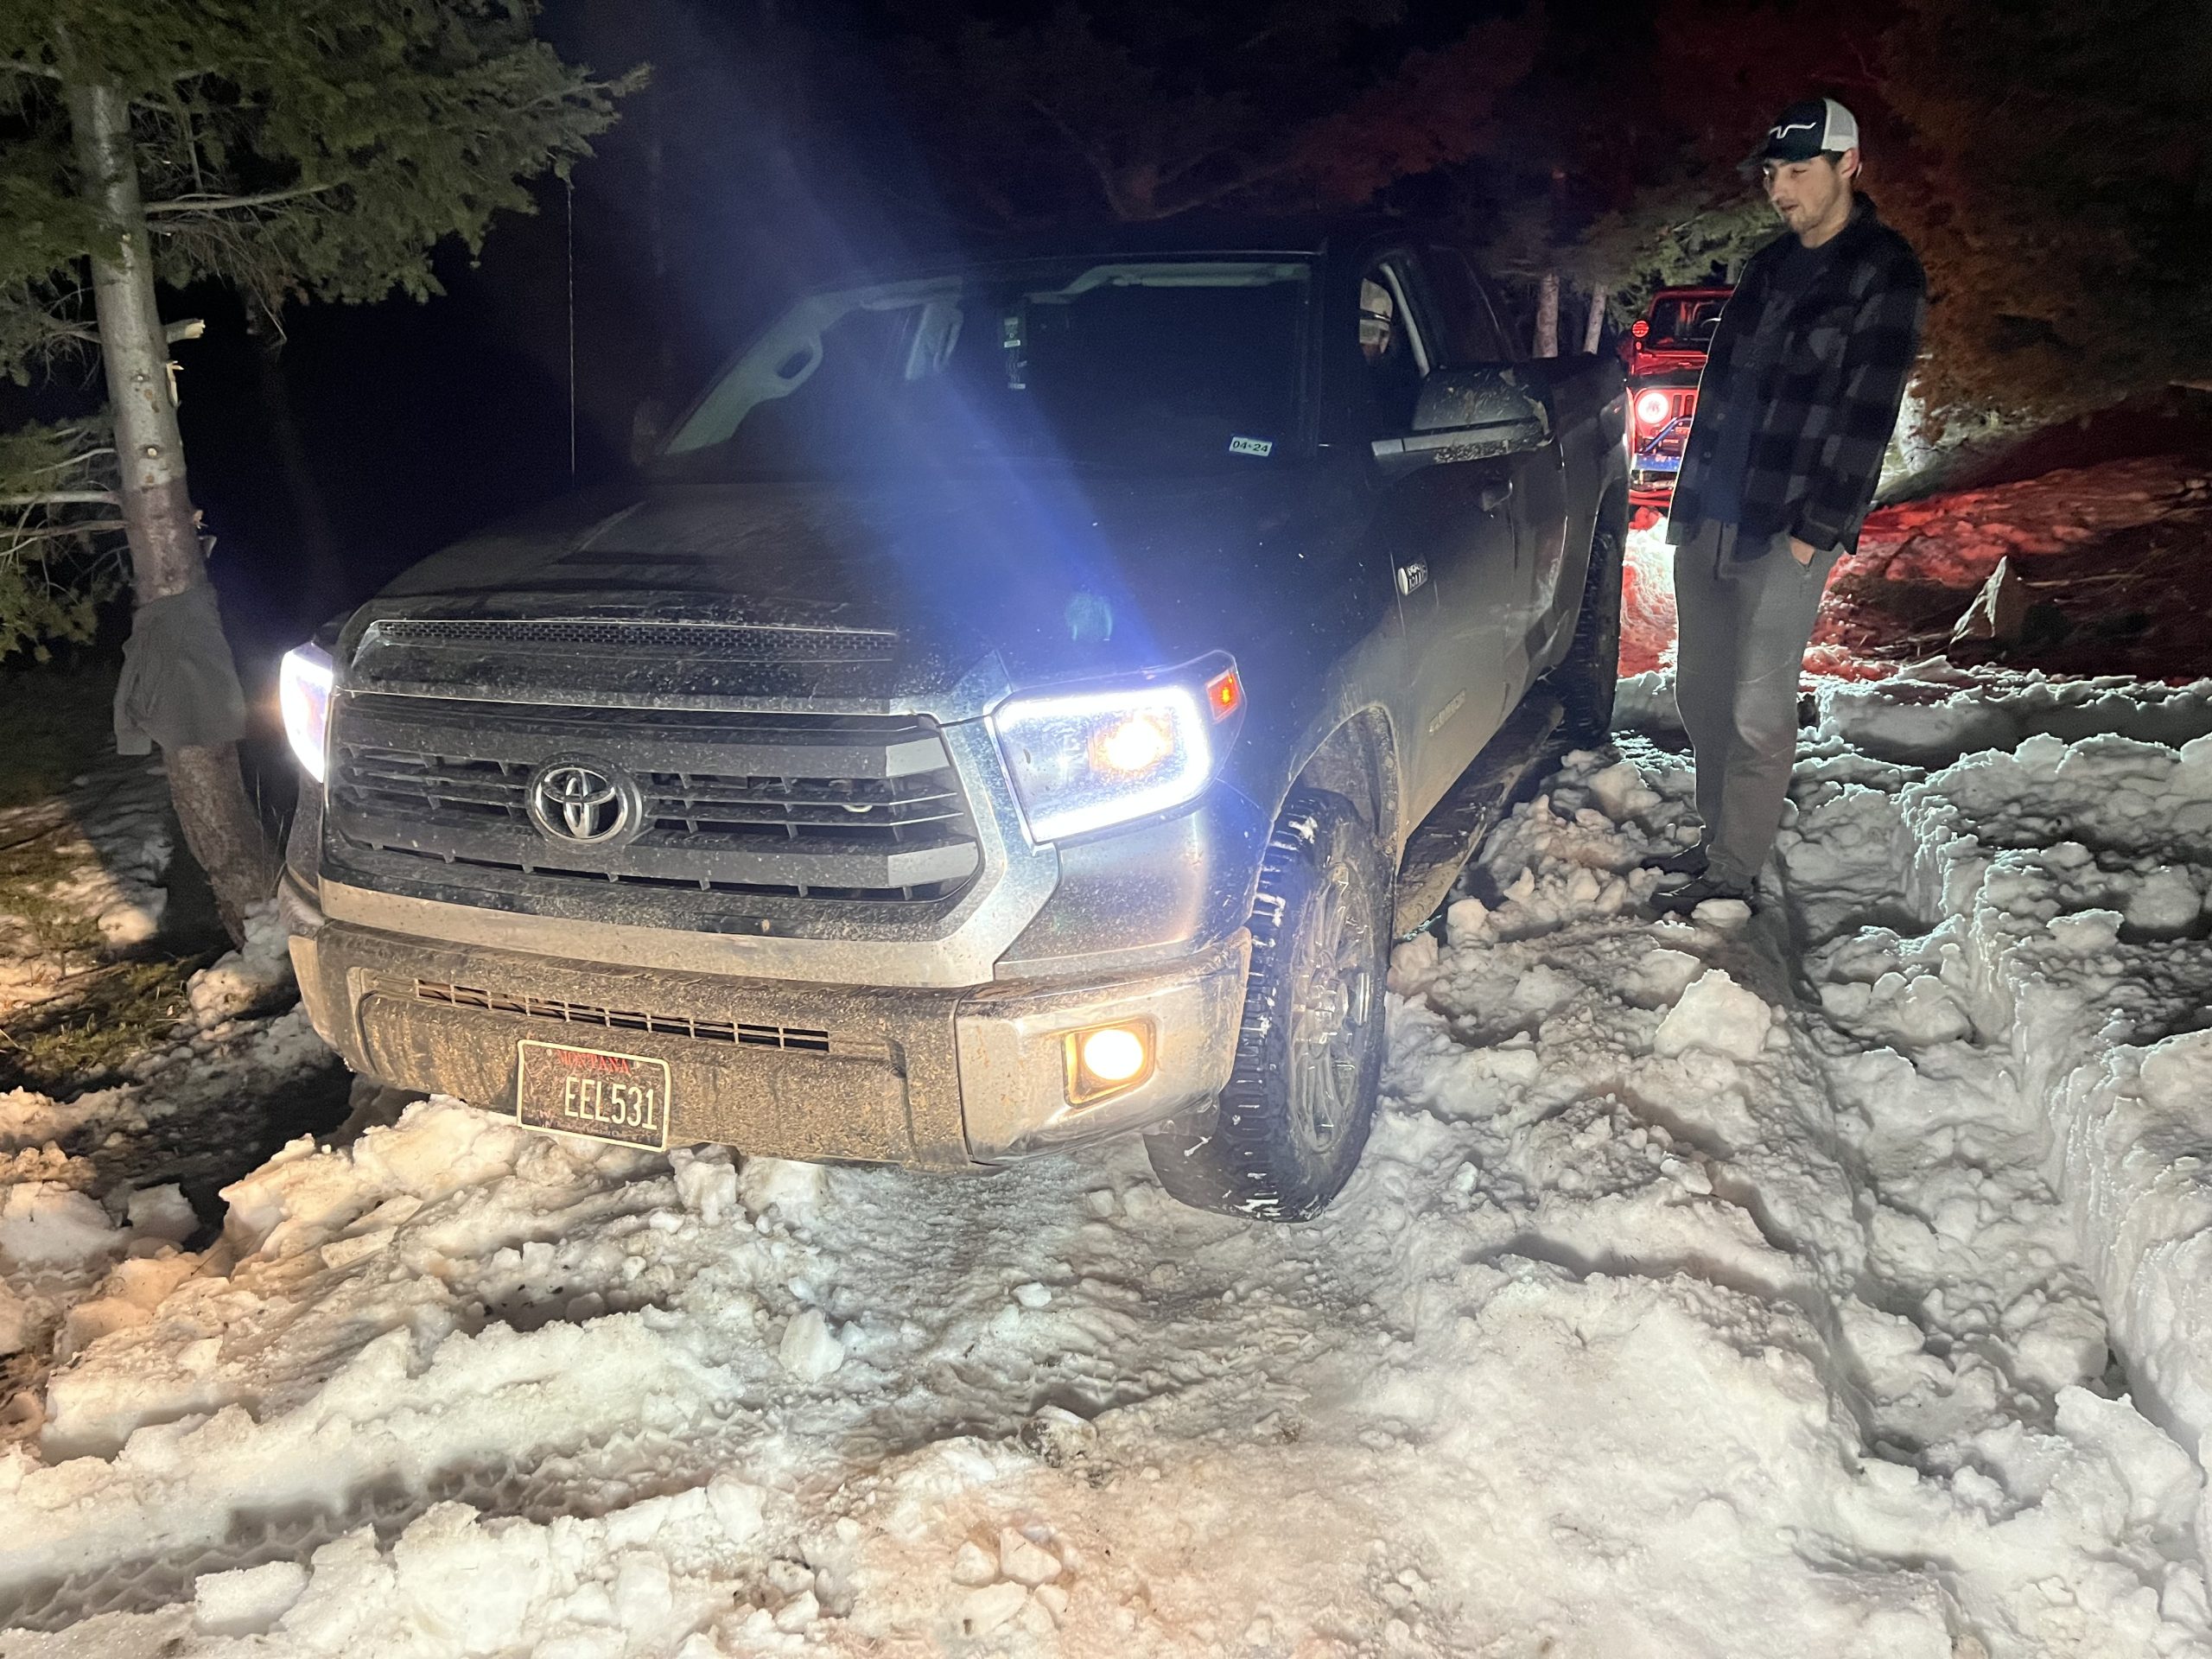 Montana offroad recovery